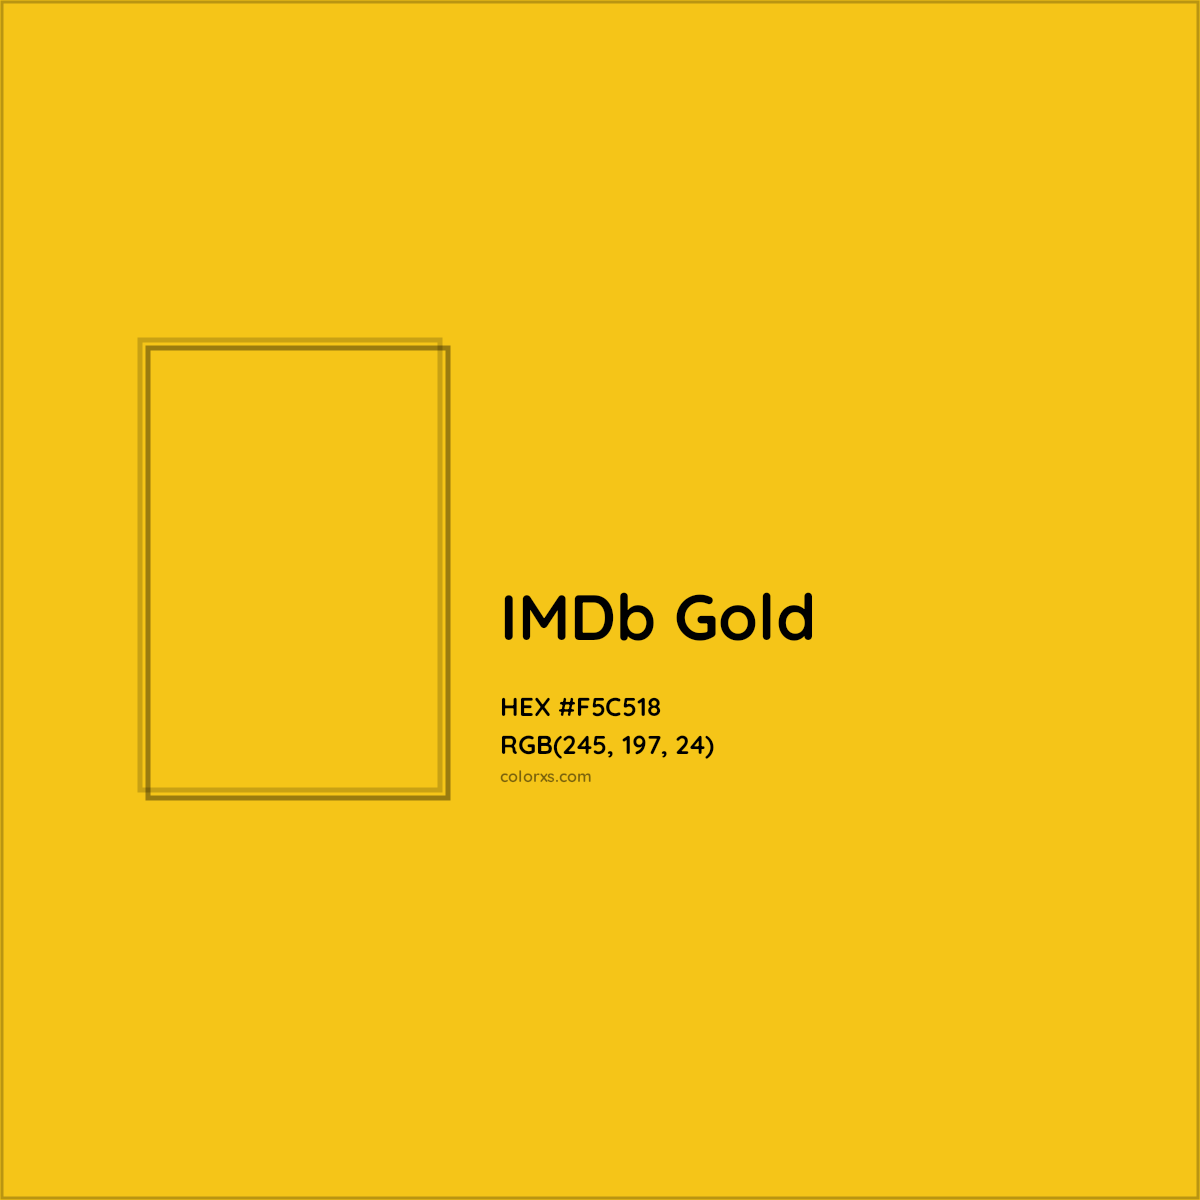 HEX #F5C518 IMDb Gold Other Brand - Color Code